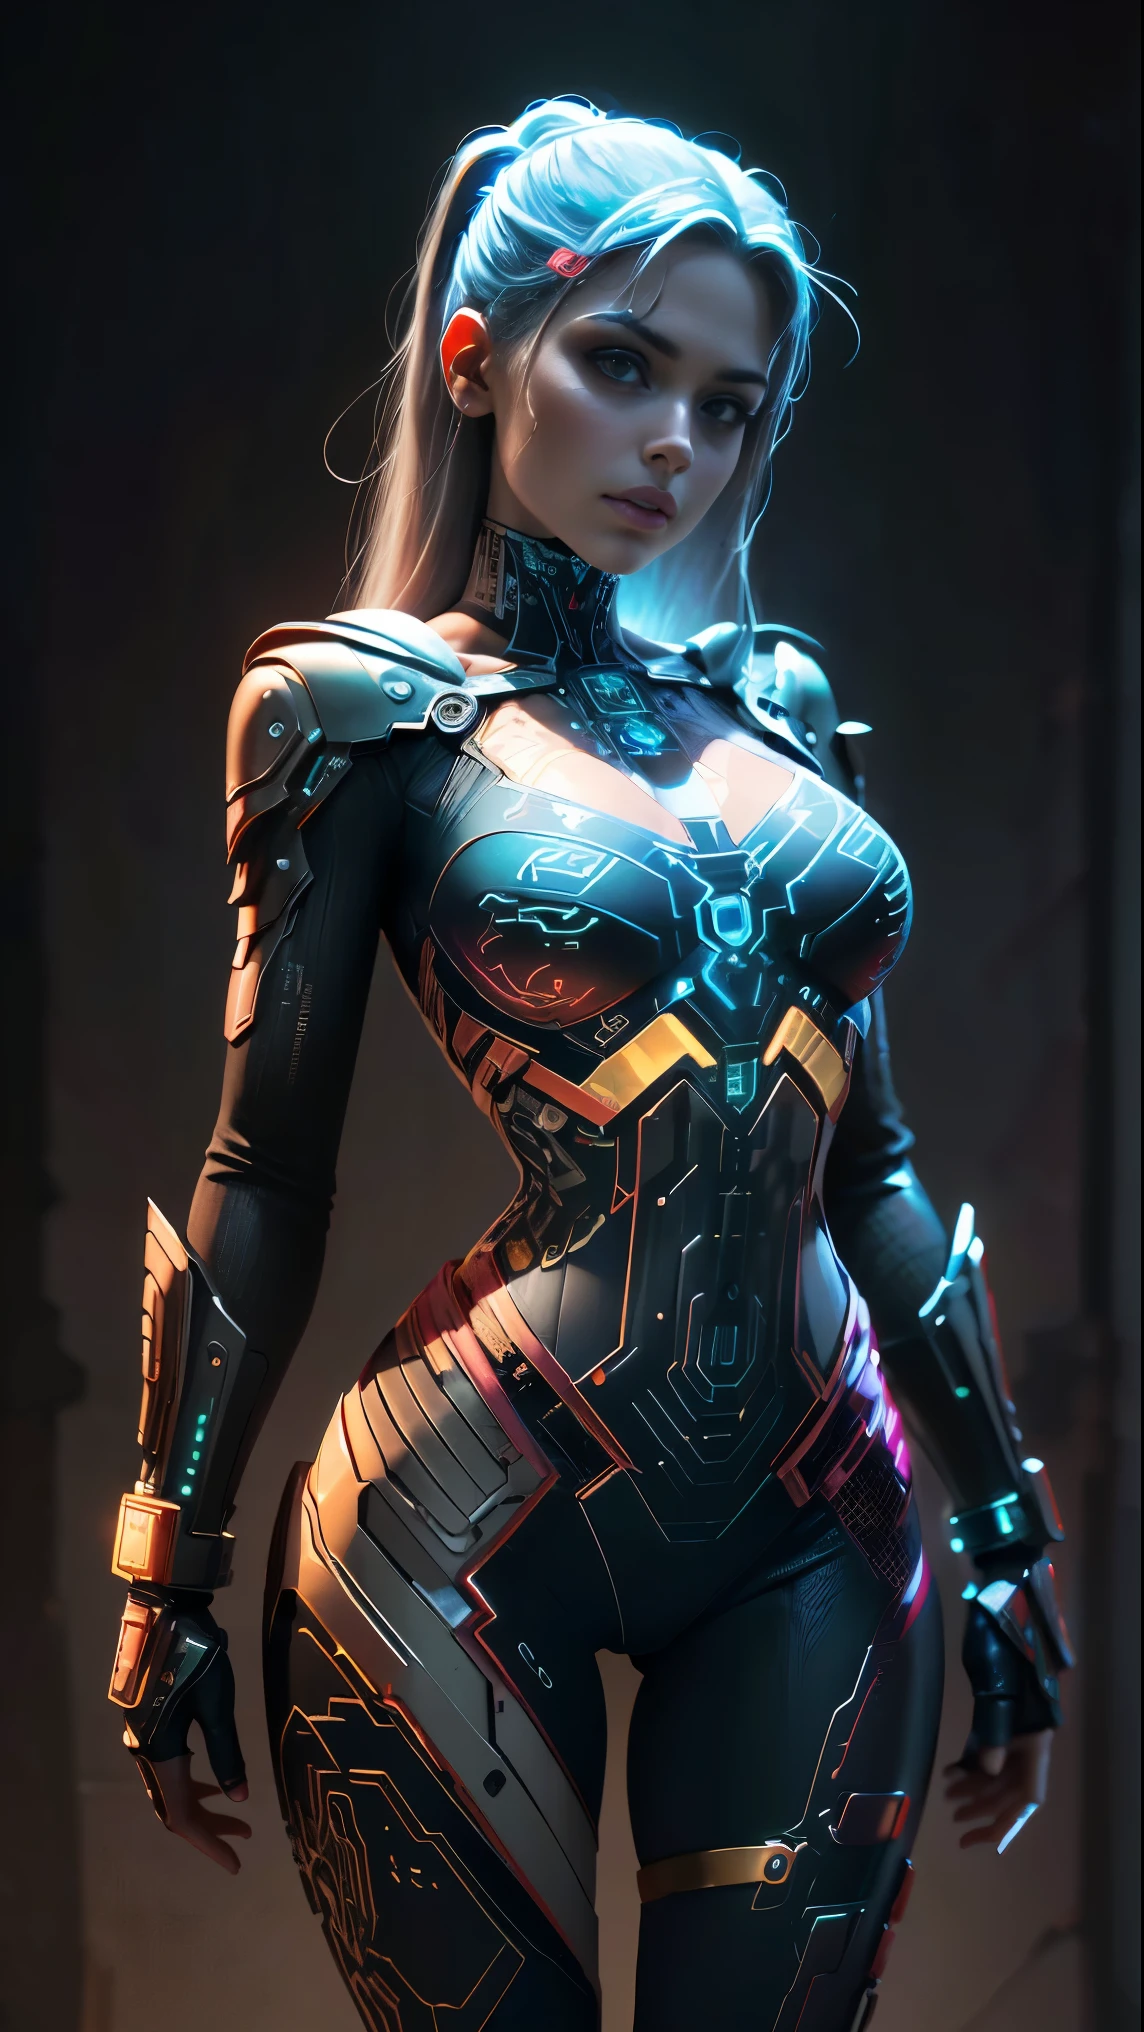 ((best qualityer)), ((Masterpiece artwork)), (detailded: 1.4), ..3d, an image of a beautiful cyberpunk supergirl woman,HDR using Superman letter S on the chest (high dynamic range),ray tracing,nvidia RTX,Super-Resolution,irreal 5,Subsurface scattering, PBR Texture, Post-processing, anisotropic filtering, Depth of field, Maximum clarity and sharpness, Multilayer textures, Albedo and Specular maps, surface shading, Accurate simulation of light-material interaction, perfectly proportions, octan render, Two-tone lighting,Wide opening,Low ISO,White balance,thirds rule,8K BRUT,CircuitBoardAI,